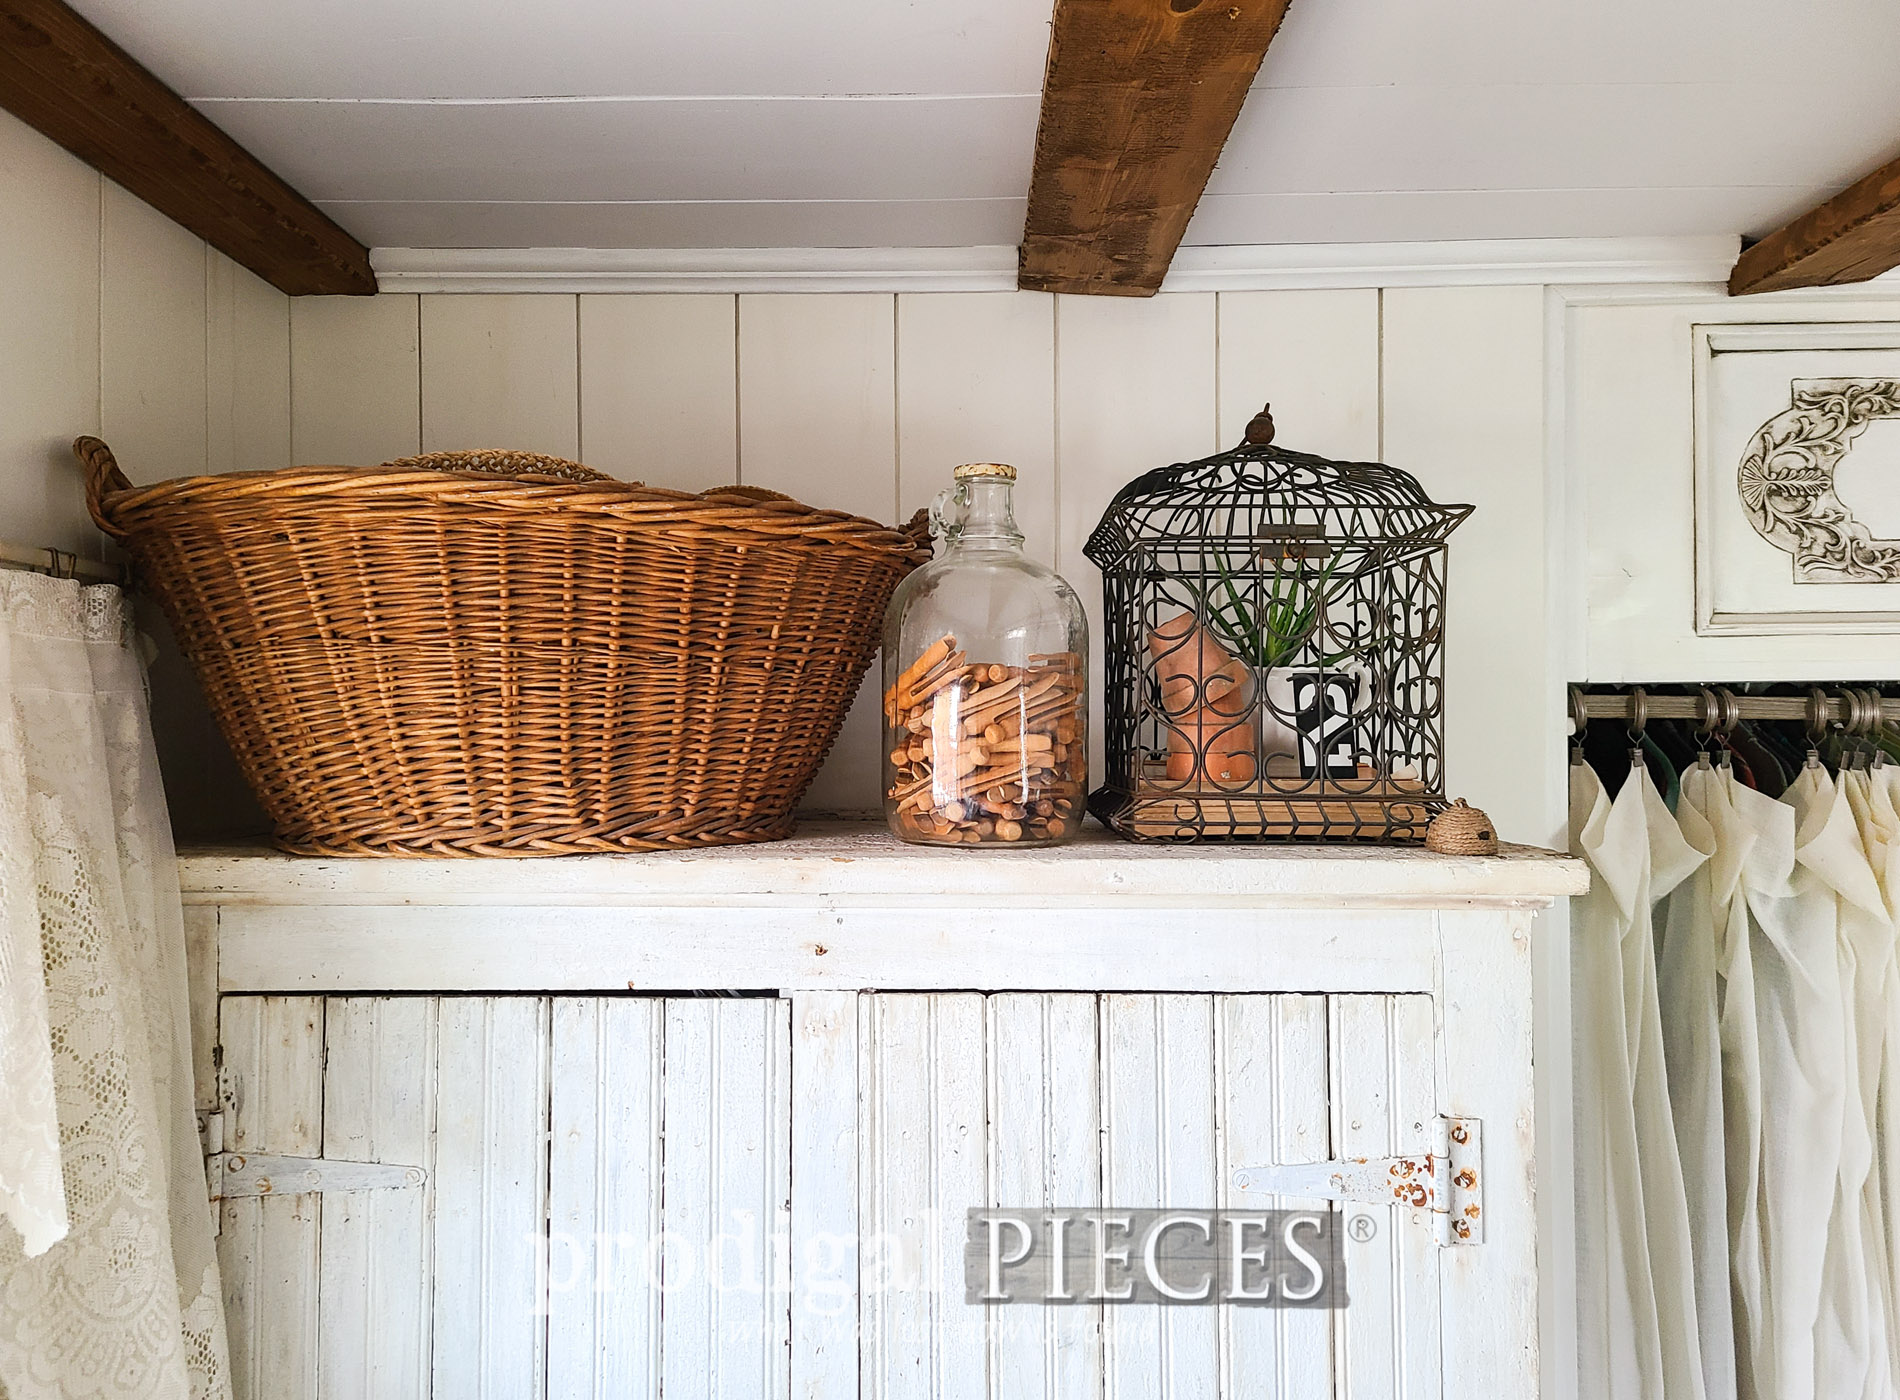 Featured Vintage Bird Cage for Spring Farmhouse Decor by Larissa of Prodigal Pieces | prodigalpieces.com #prodigalpieces #farmhouse #spring #diy #vintage